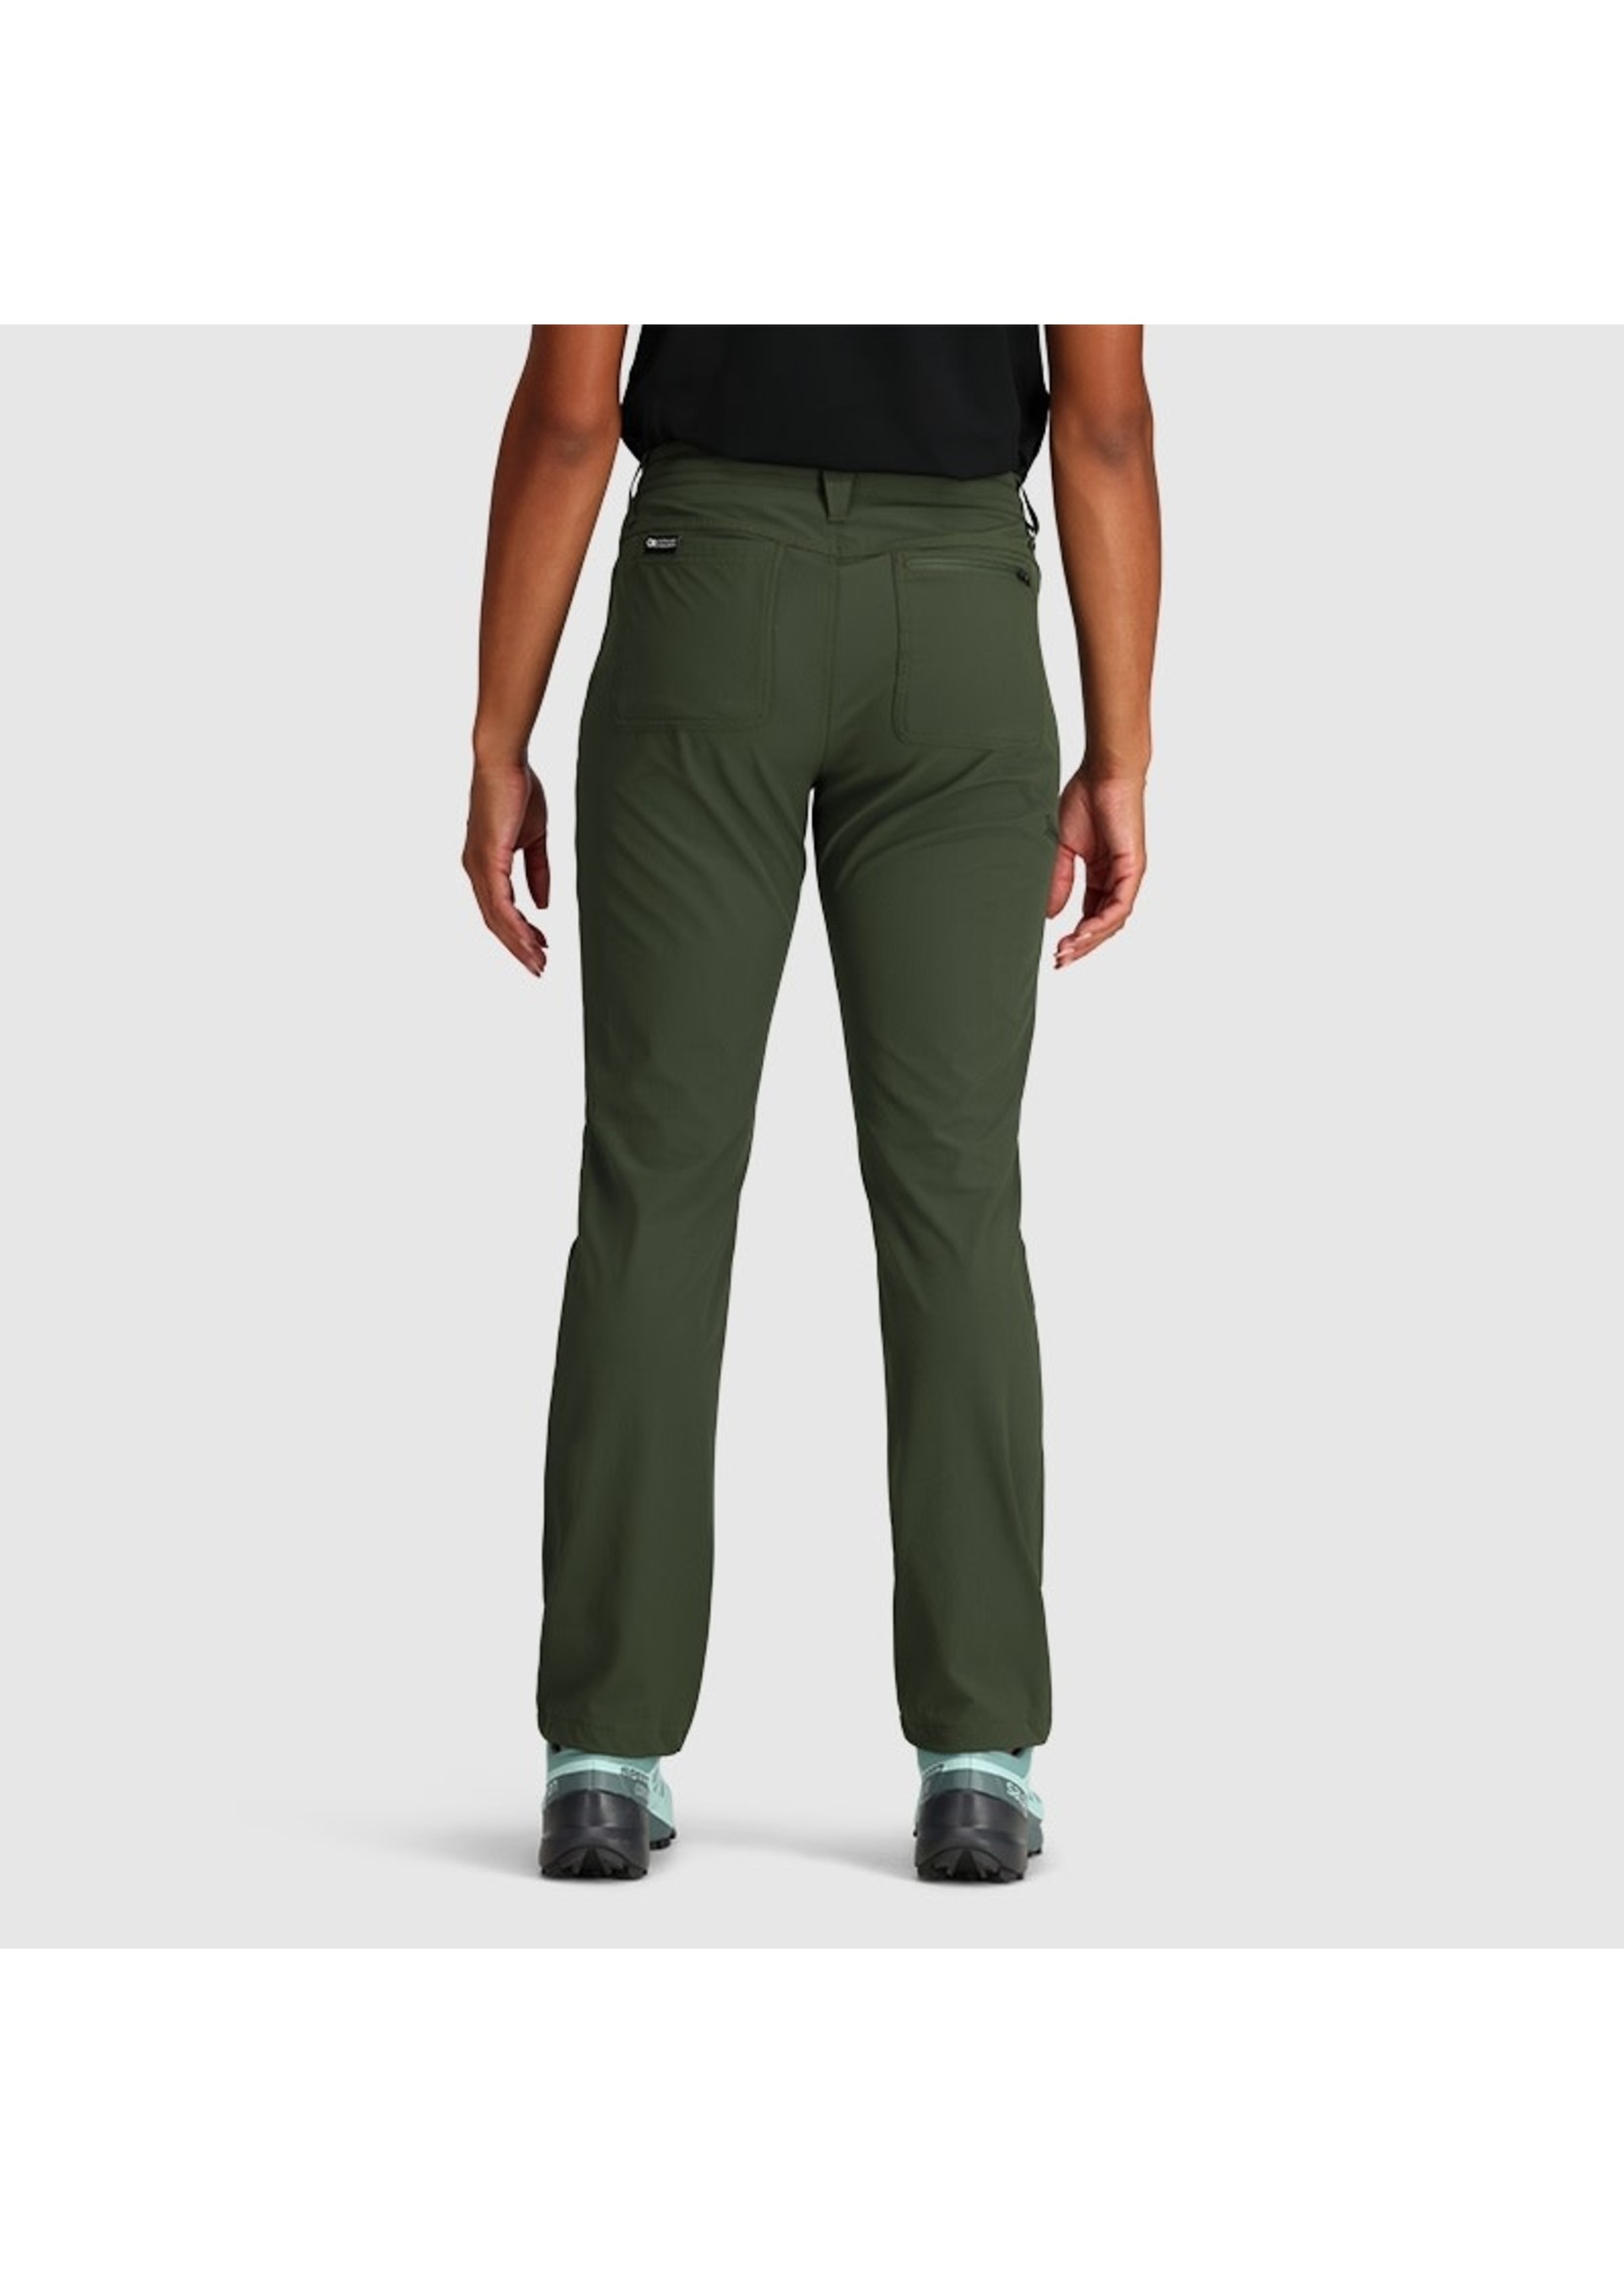 Outdoor Research Outdoor Research Ferrosi Pants - Women